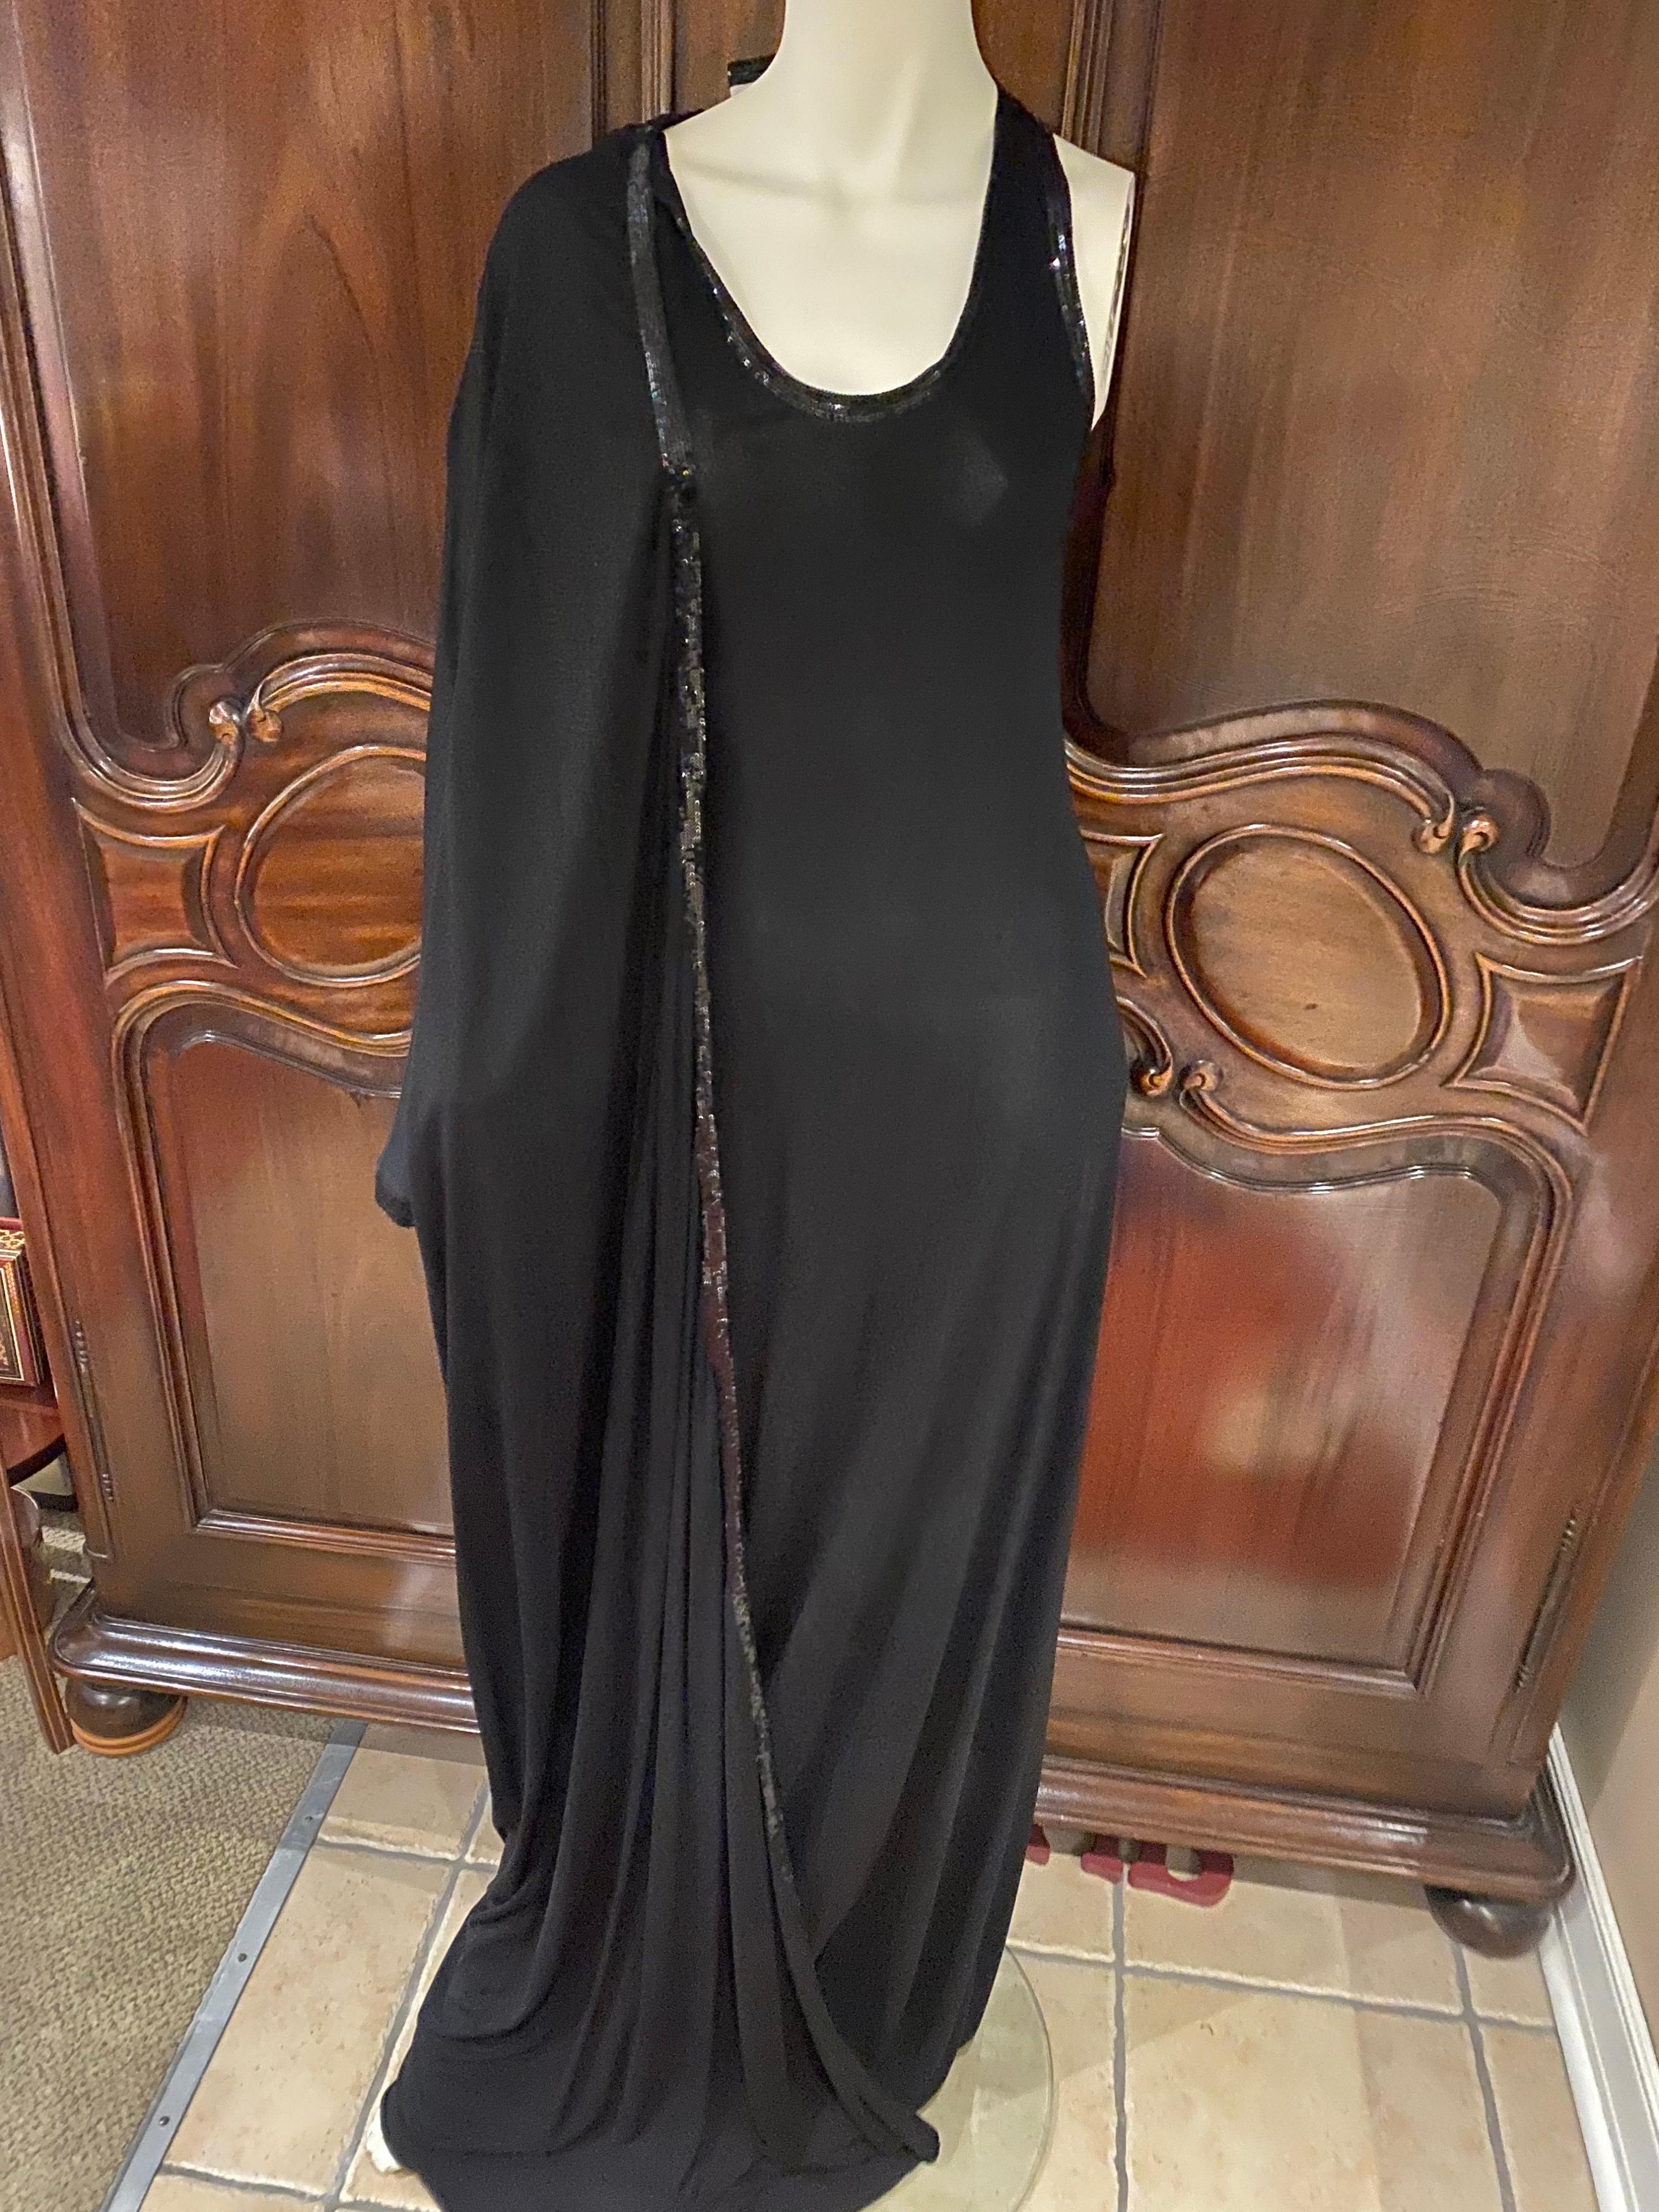 Jean Paul Gaultier Sequin Embellished Silk Long Evening Gown (US6) For Sale 2